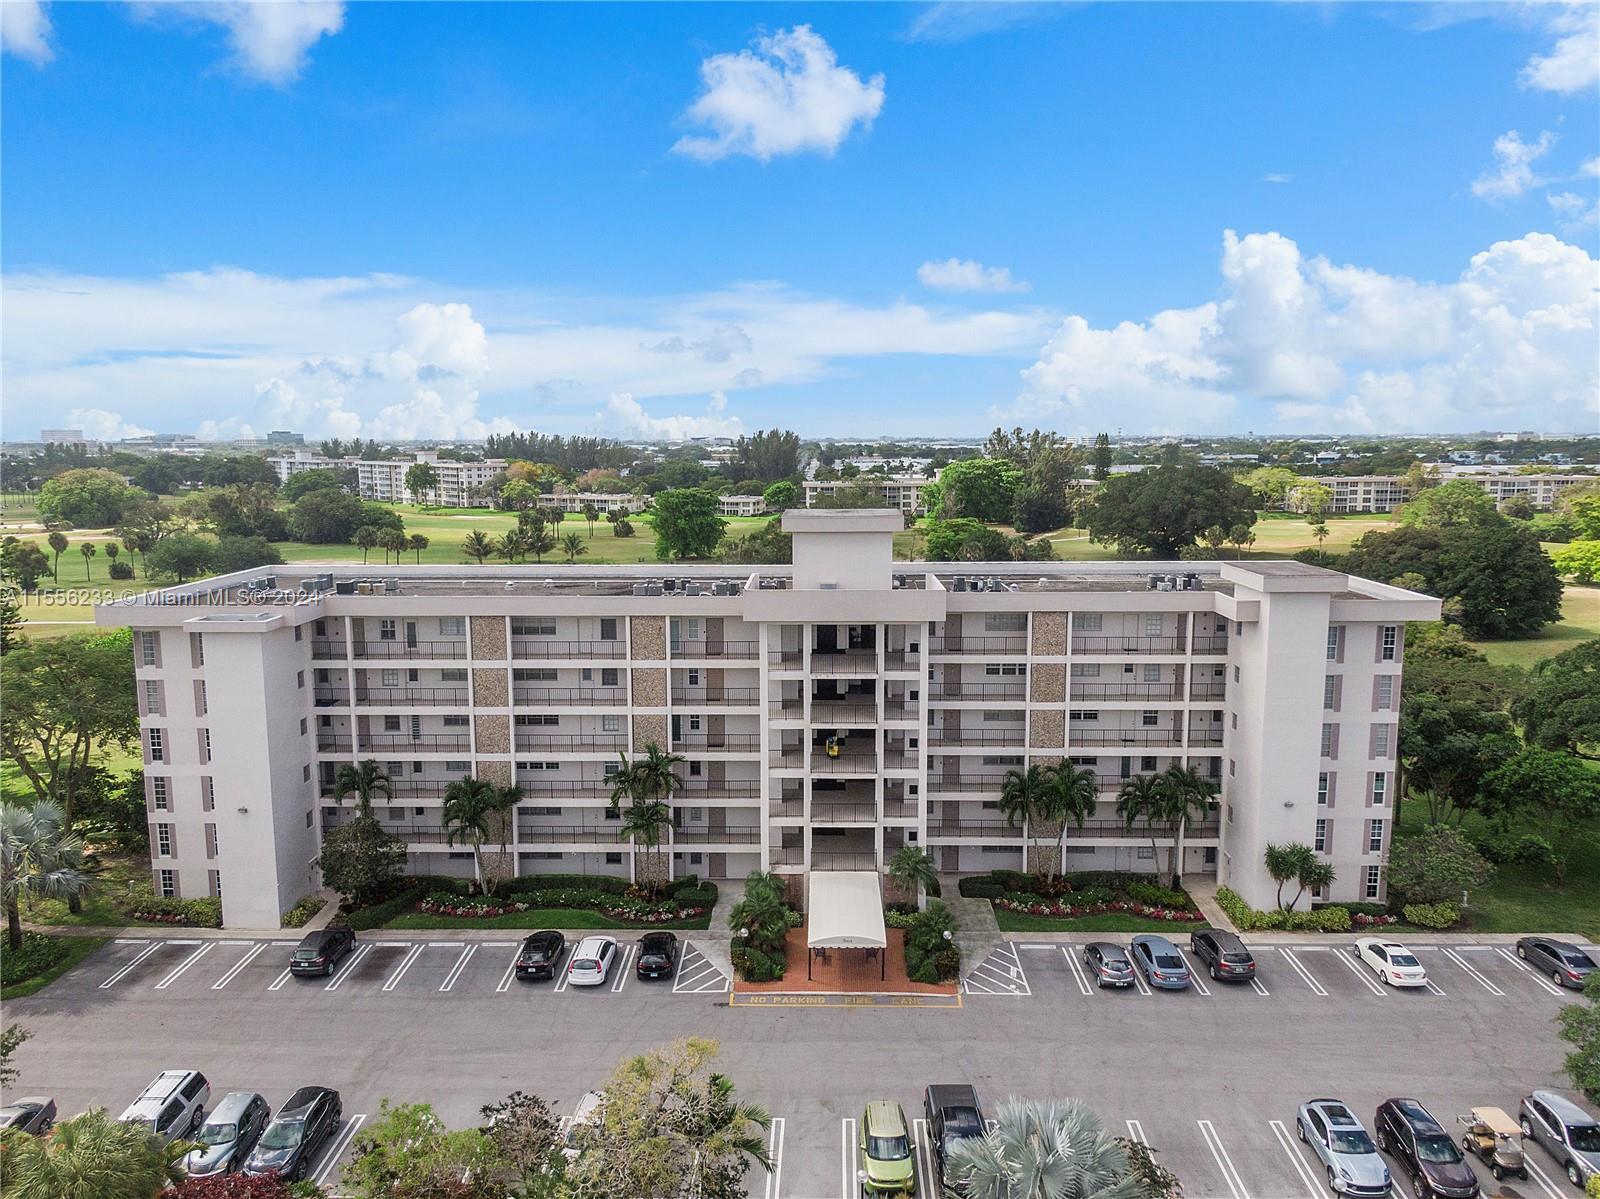 Photo of 3000 N Palm Aire Dr #403 in Pompano Beach, FL